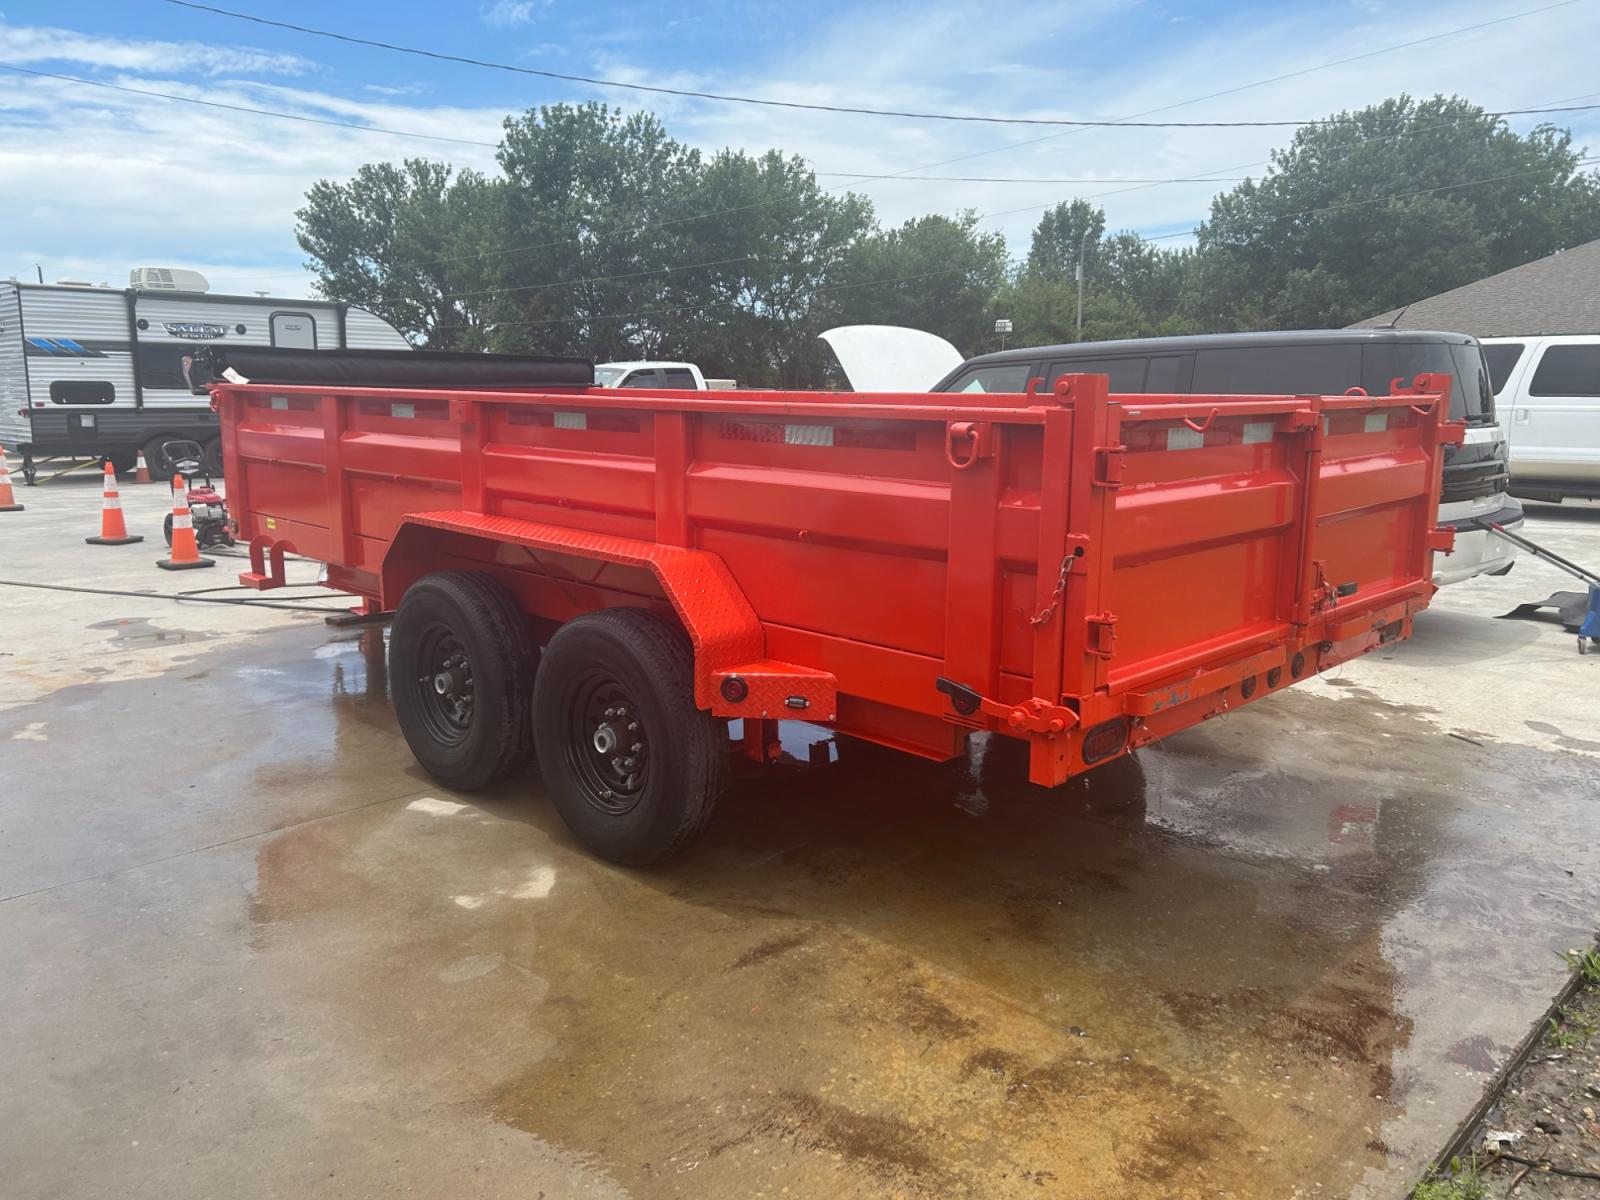 2023 ORANGE EAST TEXAS TRAILER DUMPBED (58SBD1627PE) , located at 17760 Hwy 62, Morris, OK, 74445, 35.609104, -95.877060 - 2023 EAST TEXAS DUMP BED TRAILER IS 16X83, 14,000 GVWR, 2-7000 LB DEXTER ELECTRIC BREAK SYSTEM, TONGUE MOUNTED TOOL BOX, 7 GA FLOOR, 80" SLIDE IN RAMPS, 7 WAY PLUG, LED LIGHTS, 24" HIGH 10 GA. SIDES, 6" 12 LB I-BEAM FRAME, 6" 12 LB I-BEAM TONGUE. TITLE IN HAND. TRAILER IS BASICALLY NEW AND HAS ONLY - Photo #3